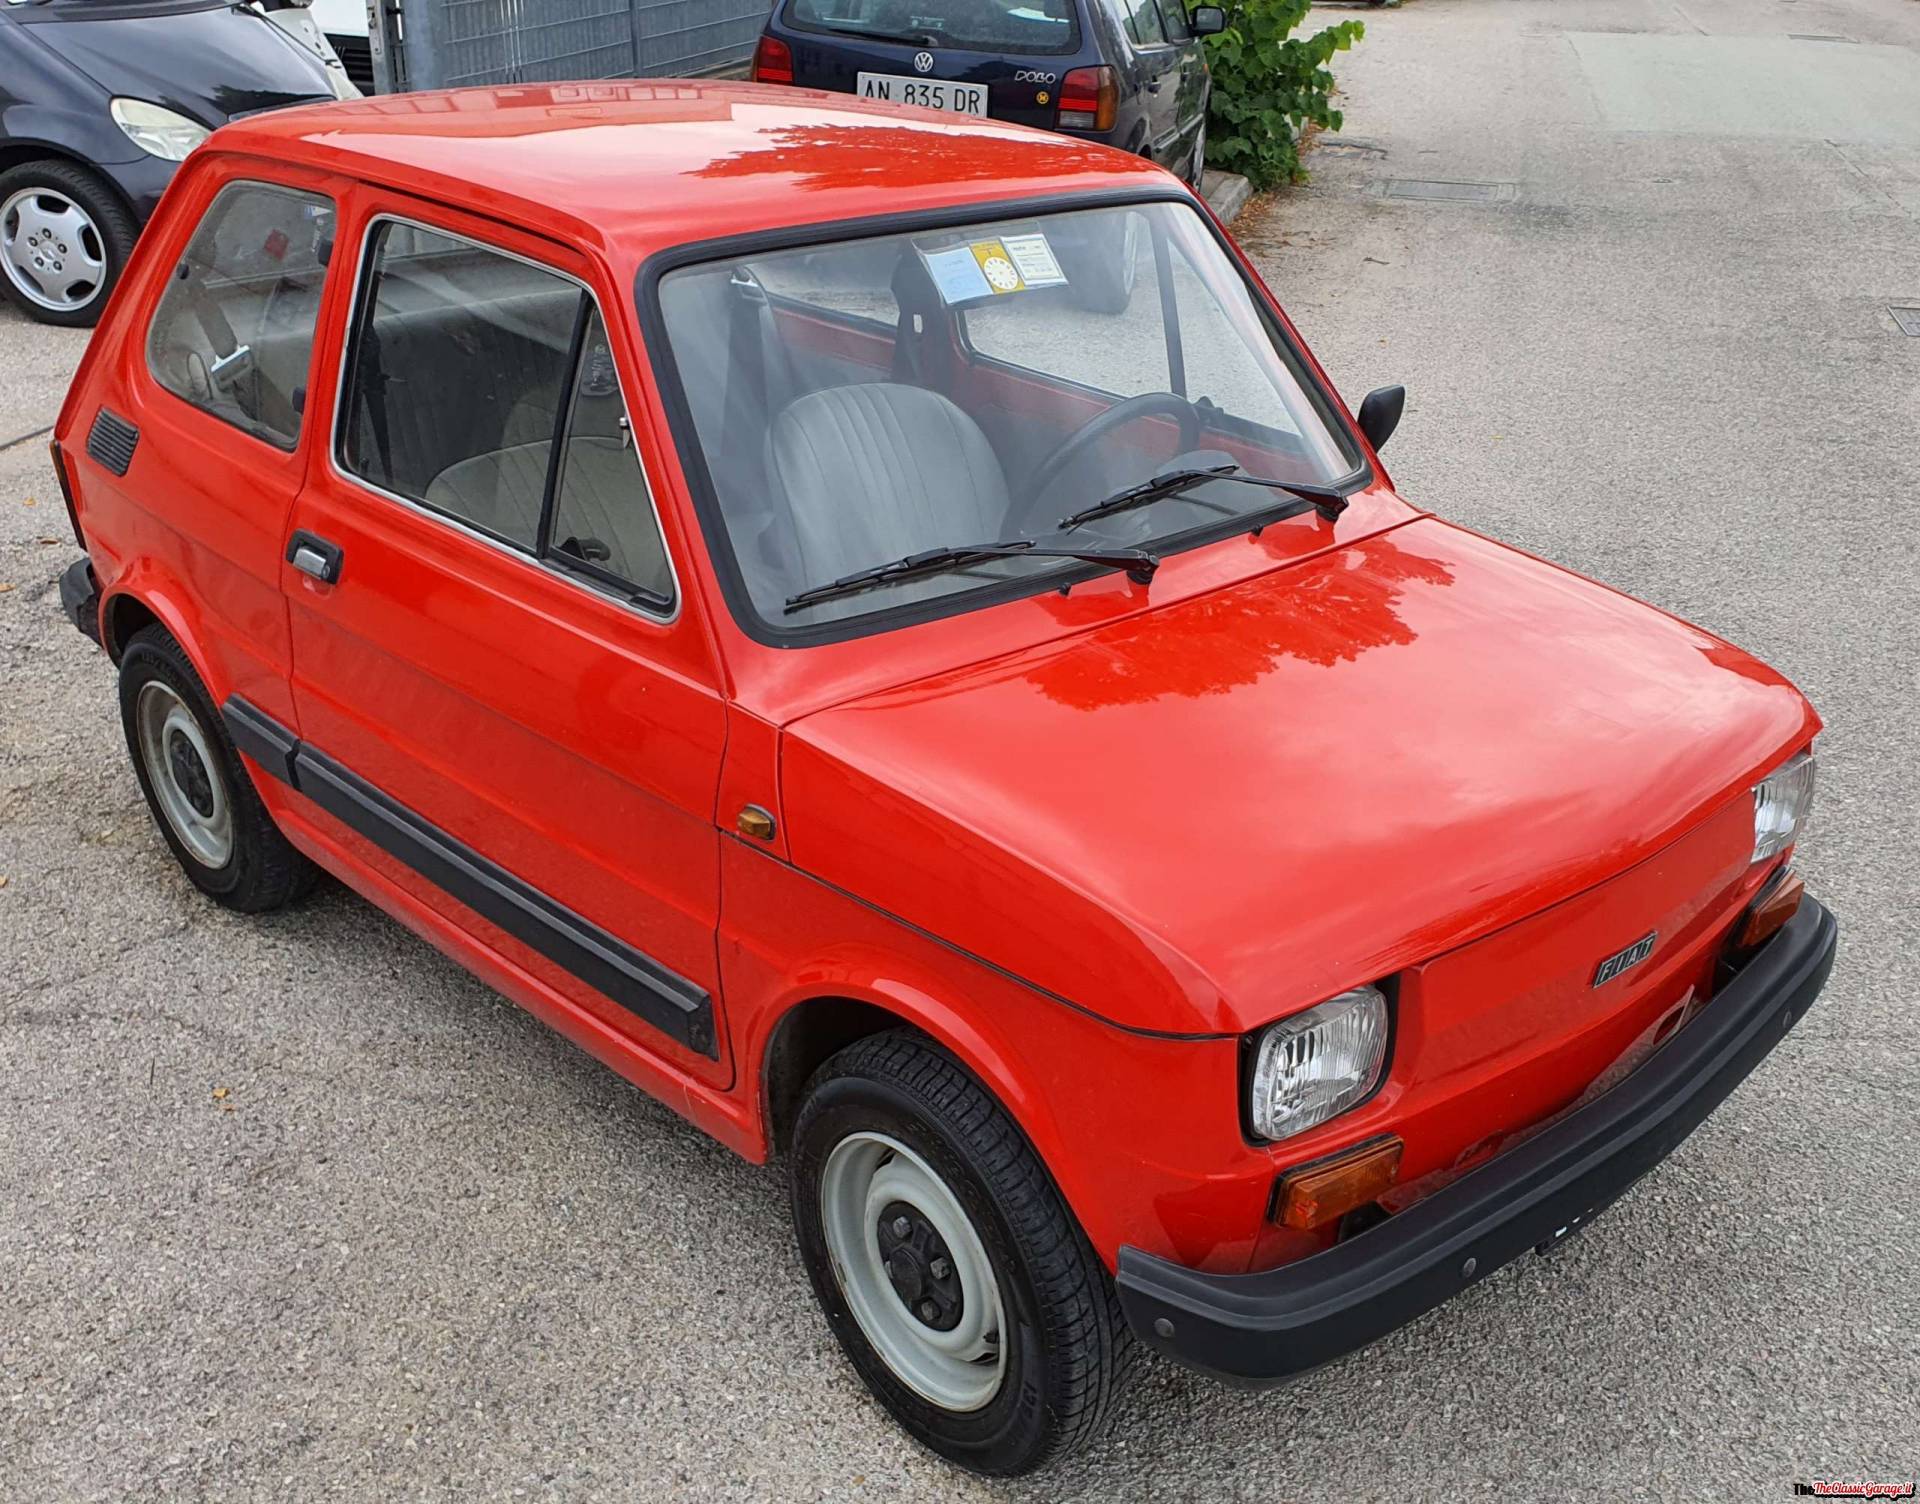  FIAT  126  Classic Cars for Sale Classic Trader